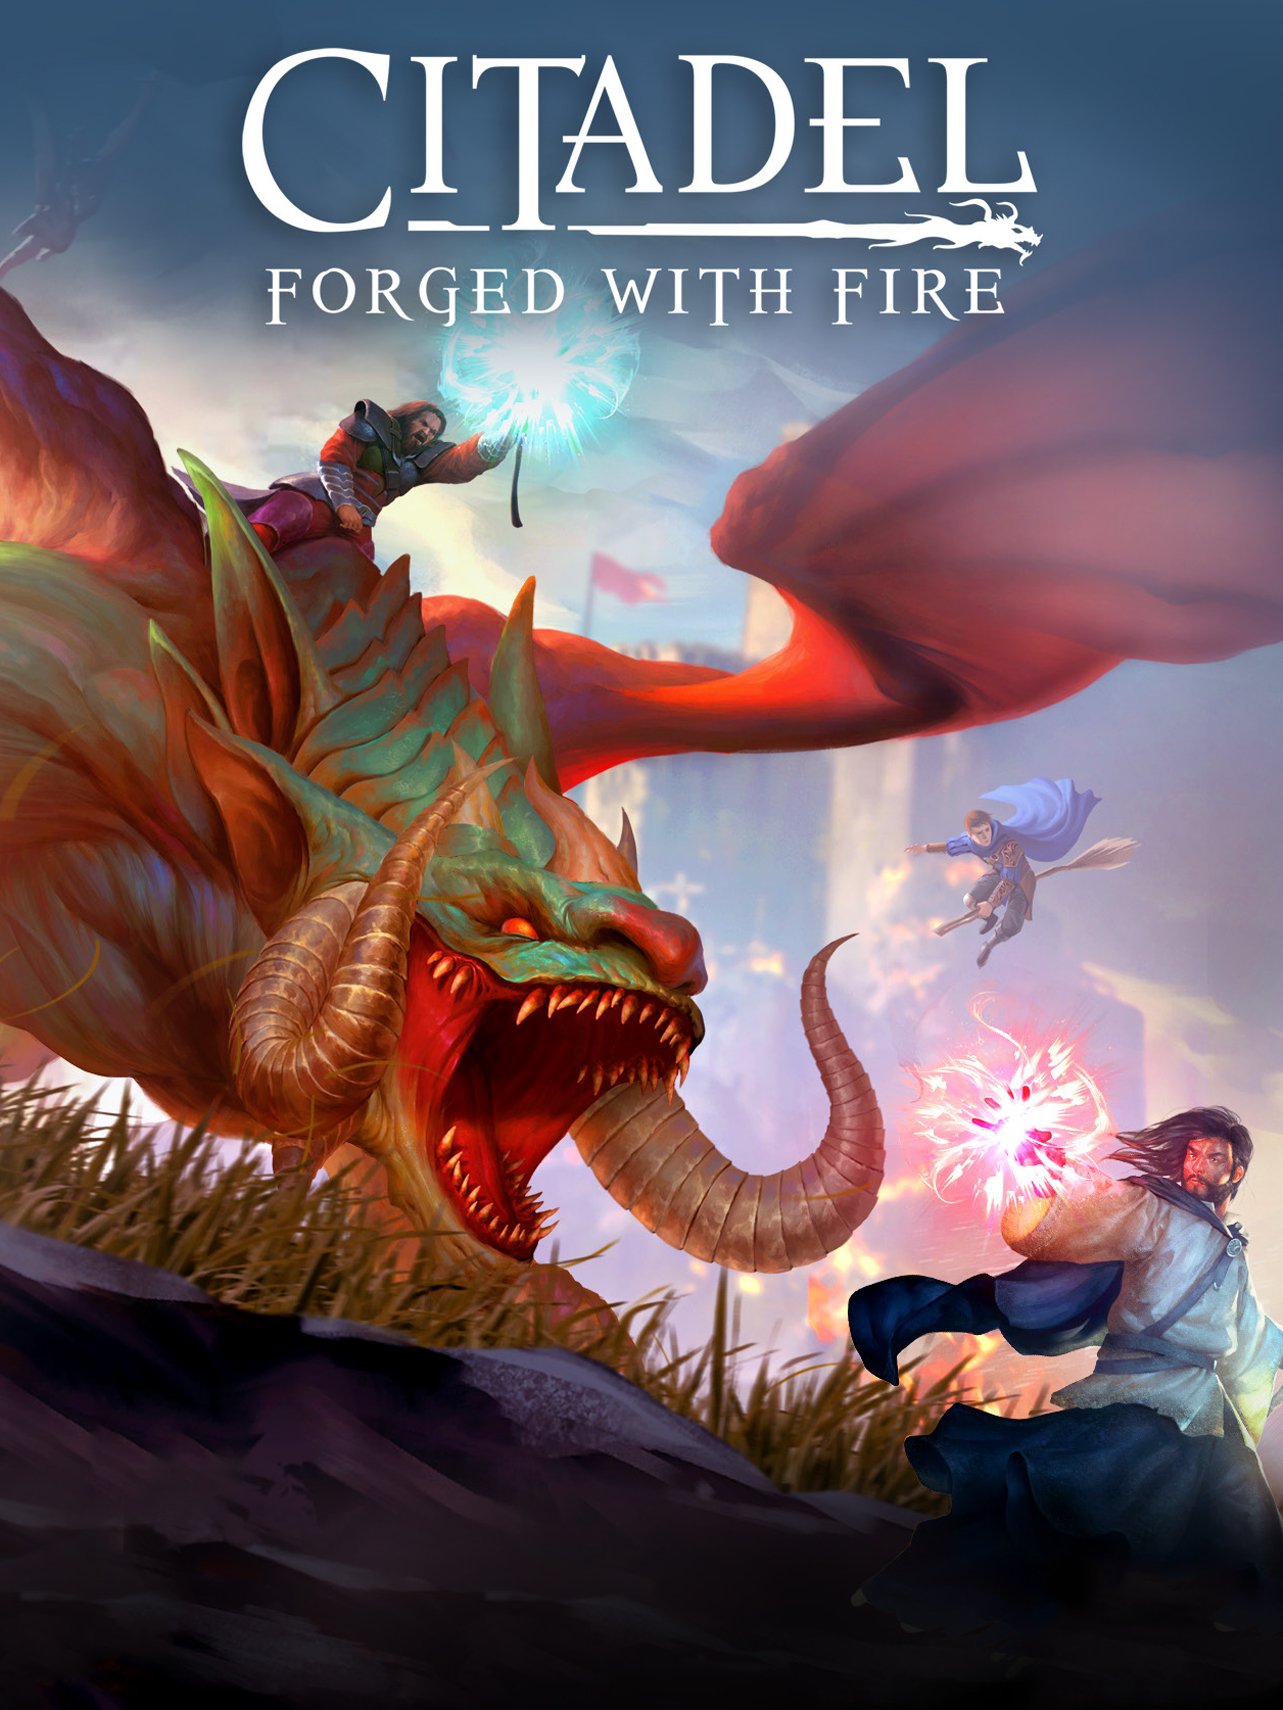 Image of Citadel: Forged With Fire